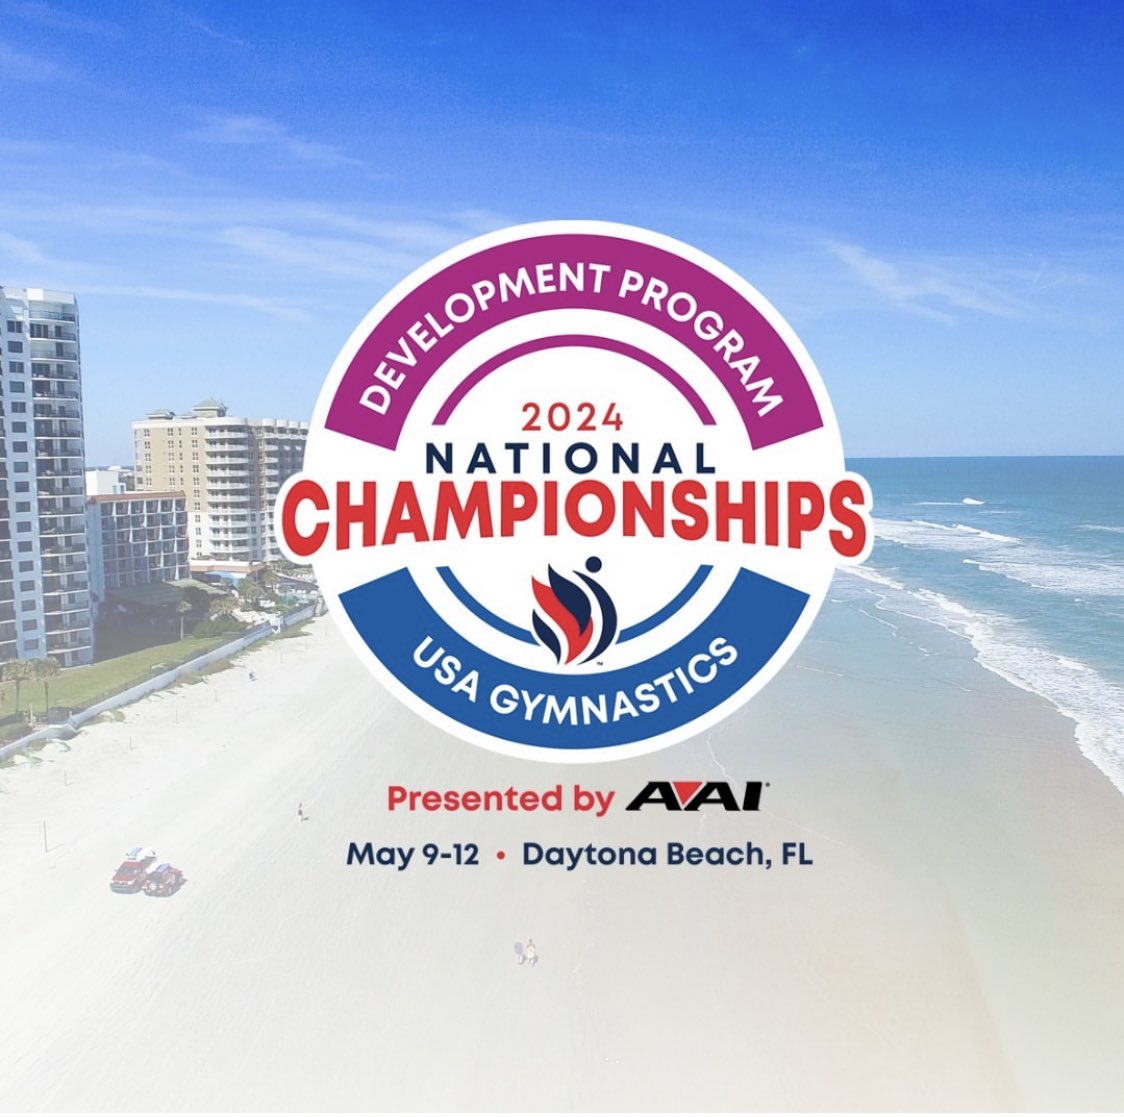 Best of luck to all competing here in FL at  
#USAGDevNats! Both HC @KimLParsons + AC @brooke_hylek are on the lookout #findingfuturebears‼️
 
#Ursinus #NCGAgym #NCAAgym